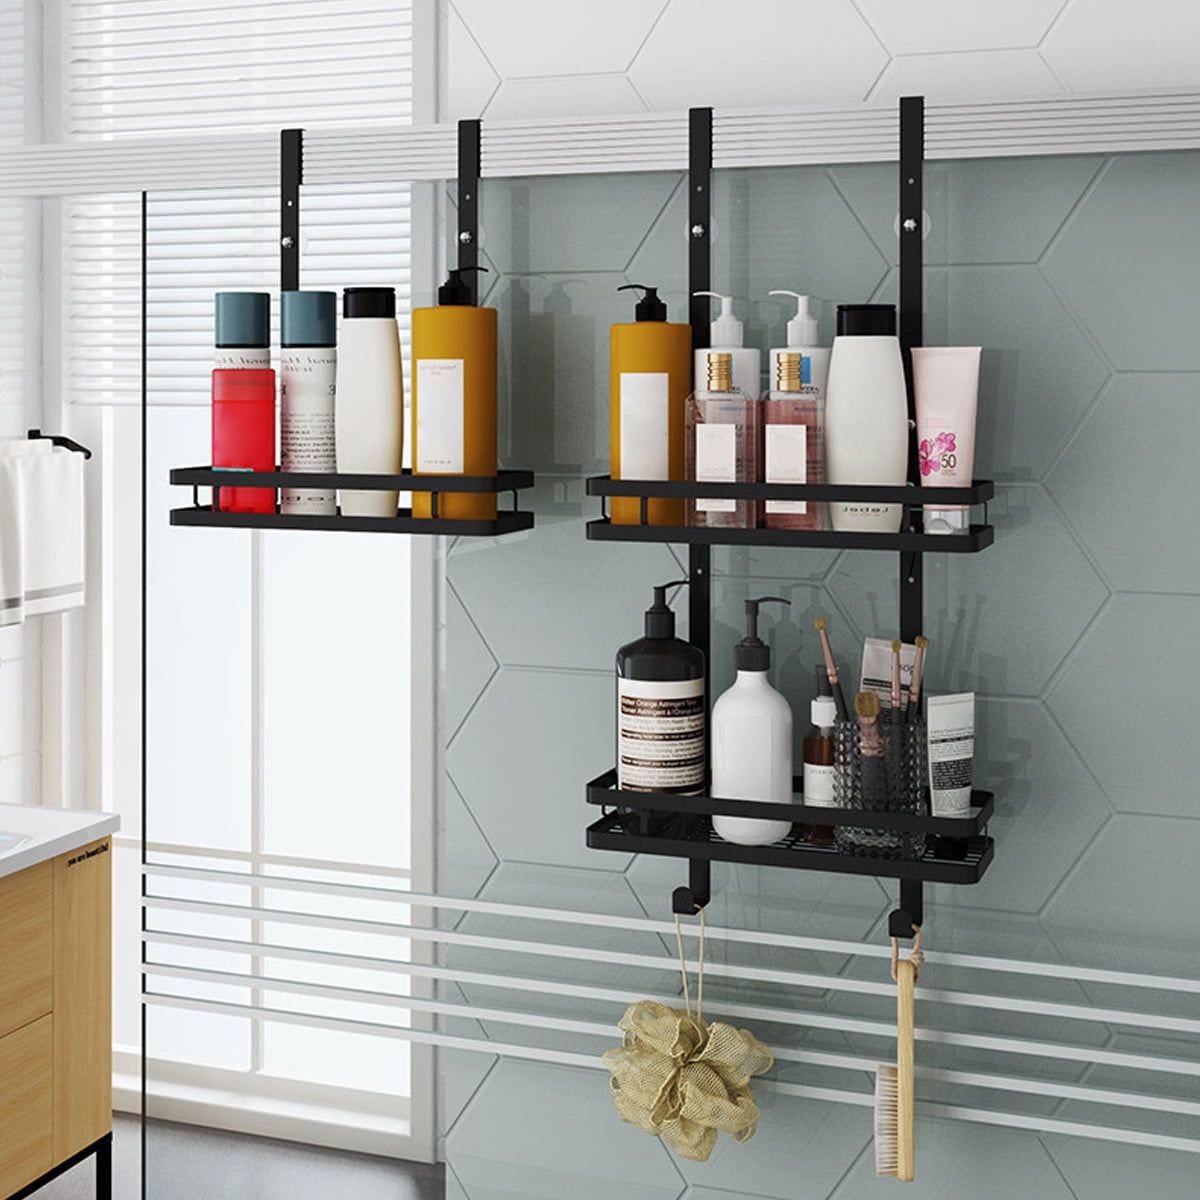 Dyiom Shower Caddy Shelf with 11 Hooks, Shower Rack for Hanging Razor, Soap  and Shower Gel 307746583 - The Home Depot